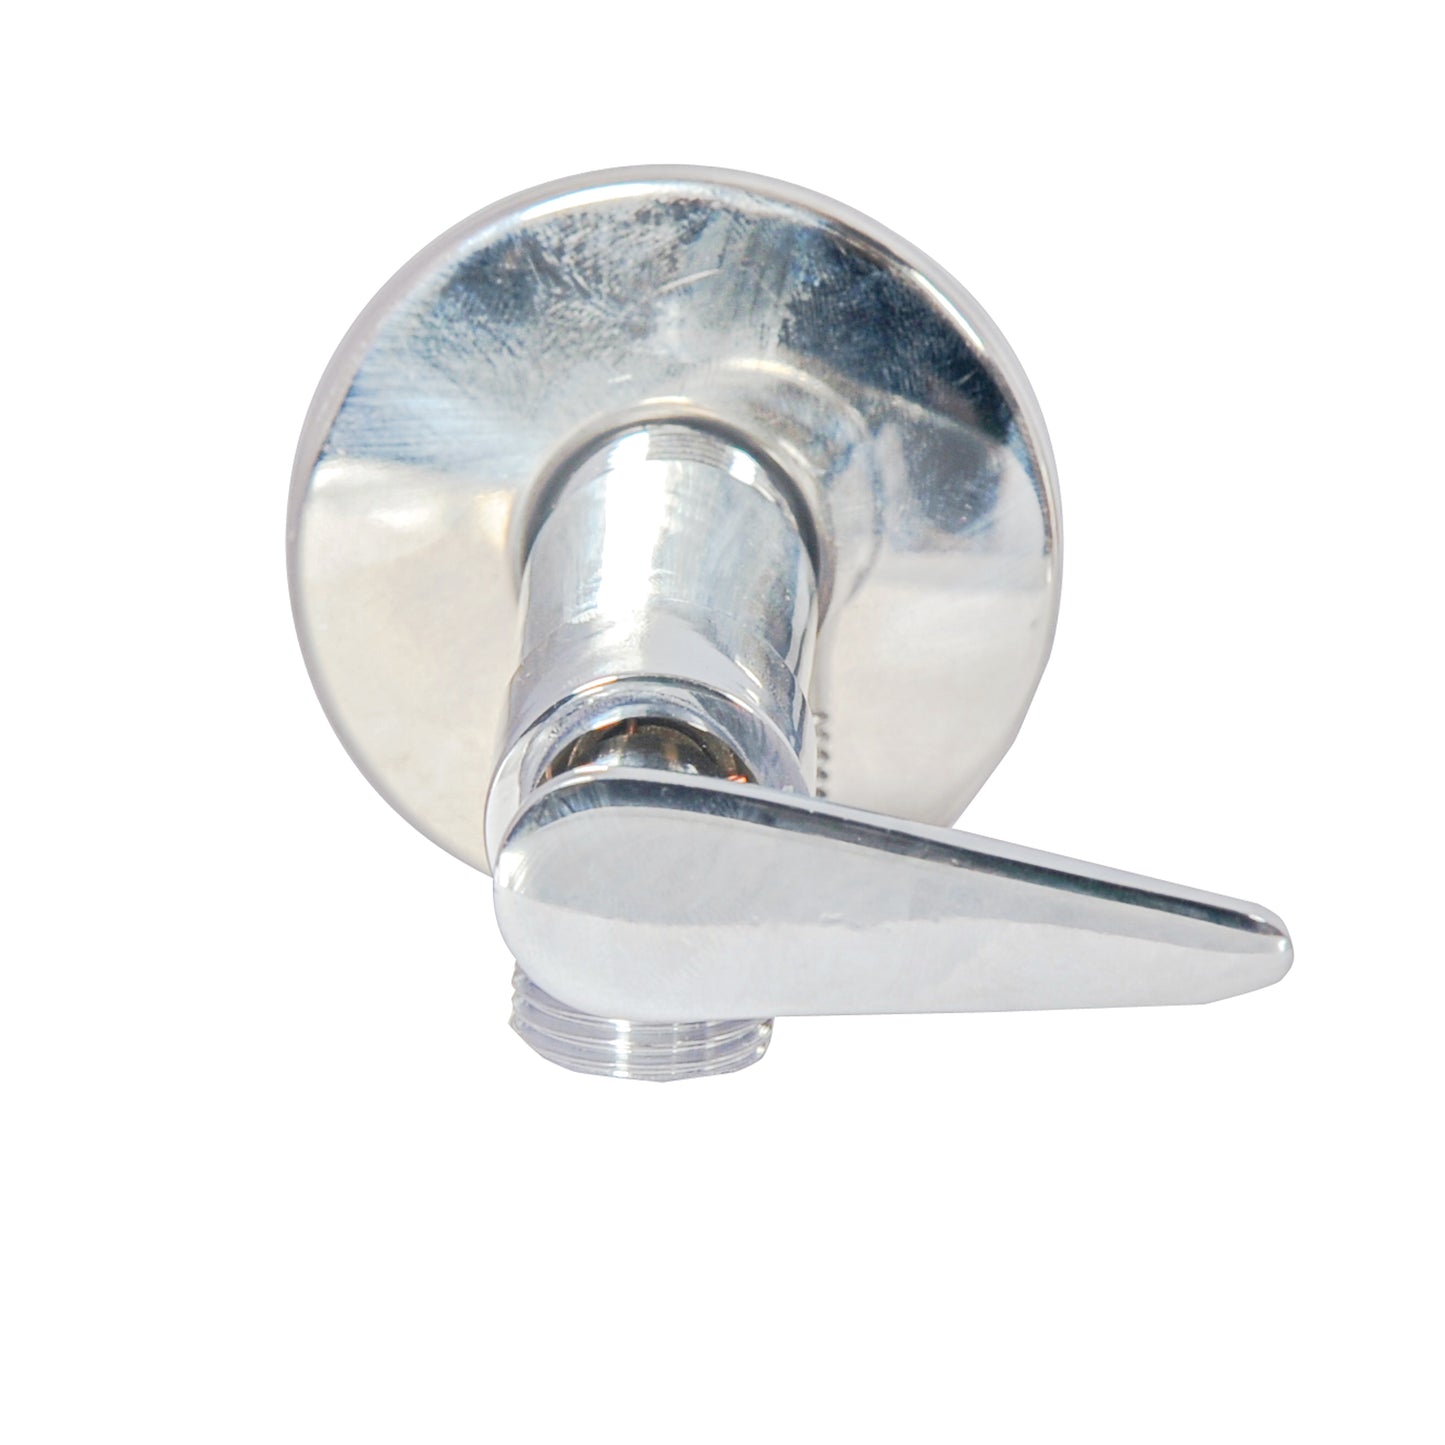 AC-01 Angle Cock tap for Bathroom, Kitchen, washbasin, tap faucets with Wall Flange